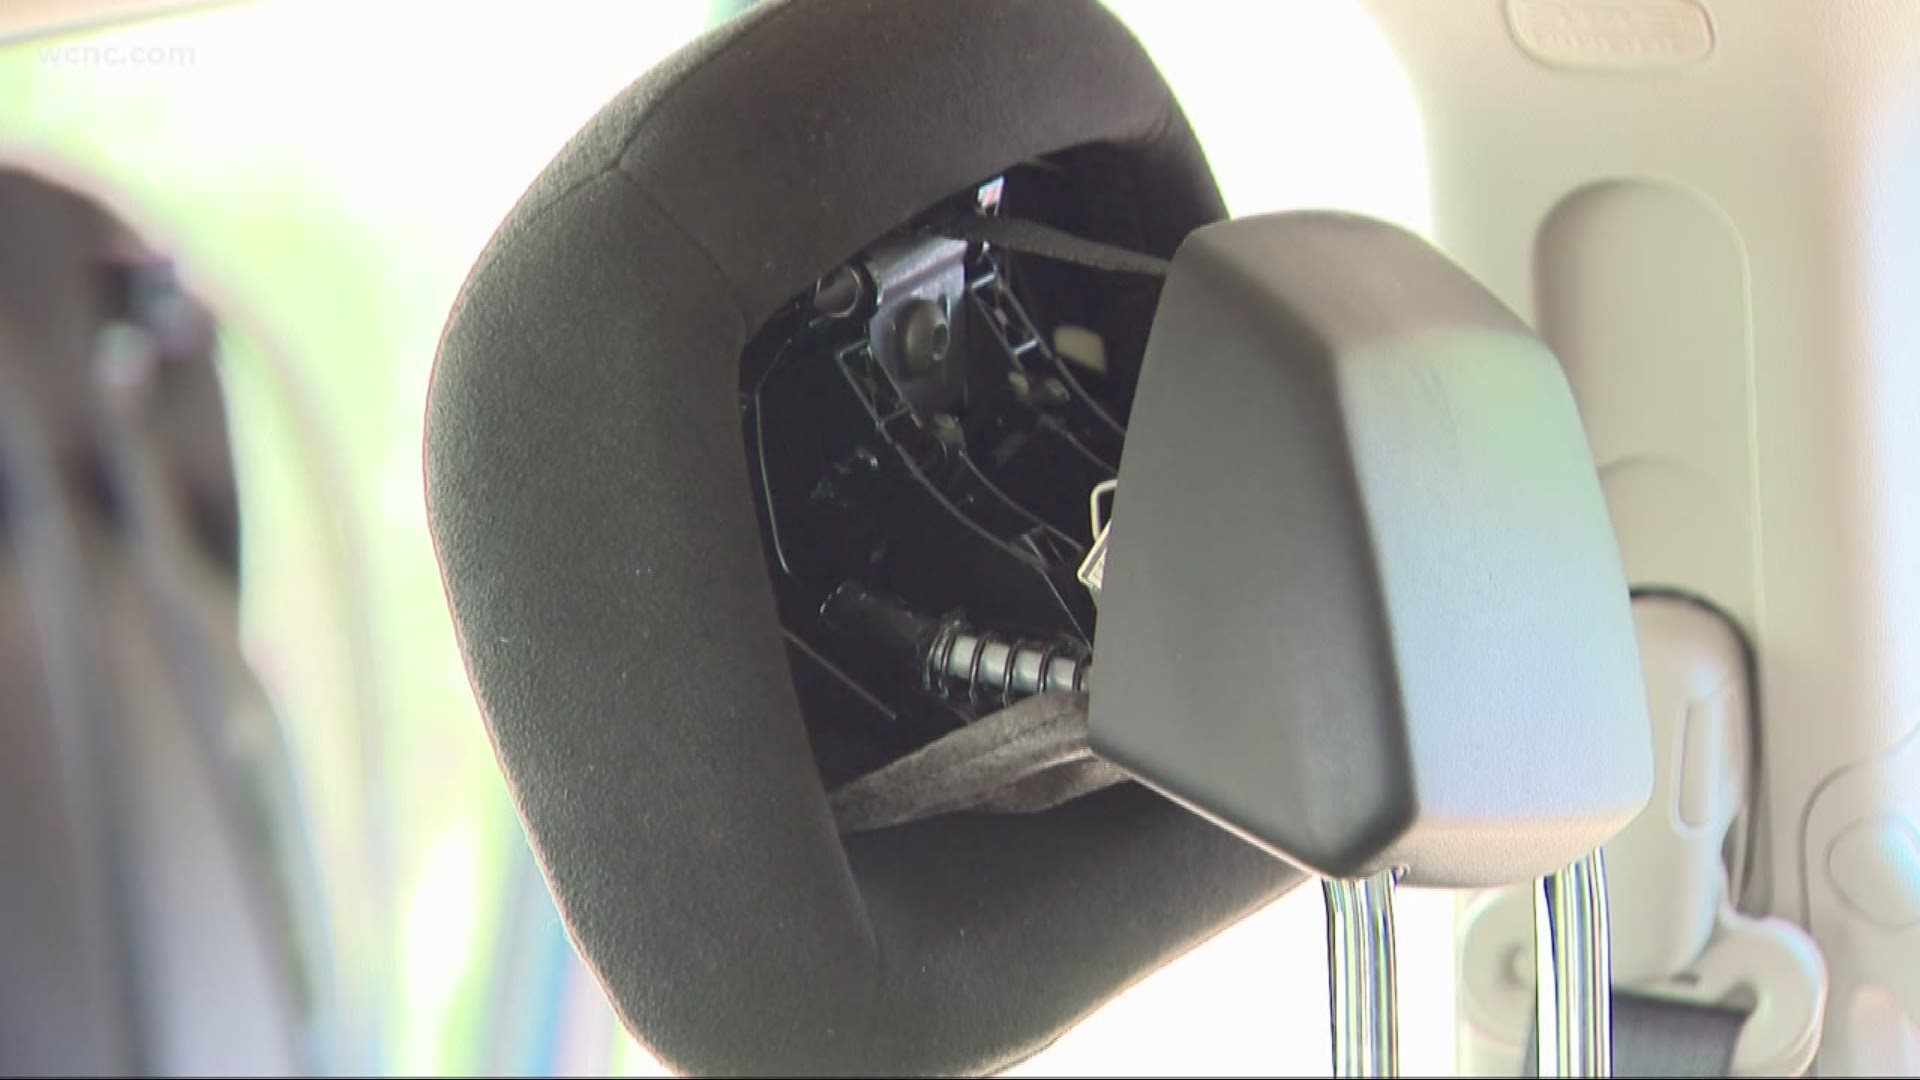 A Mooresville mom-to-be says the headrest in her Dodge Caravan activated, without explanation. When she investigated the issue and cost to repair, she was told it’s on her. She decided to “Get McGinty” to make things right and help warn other drivers about what she says is a danger.